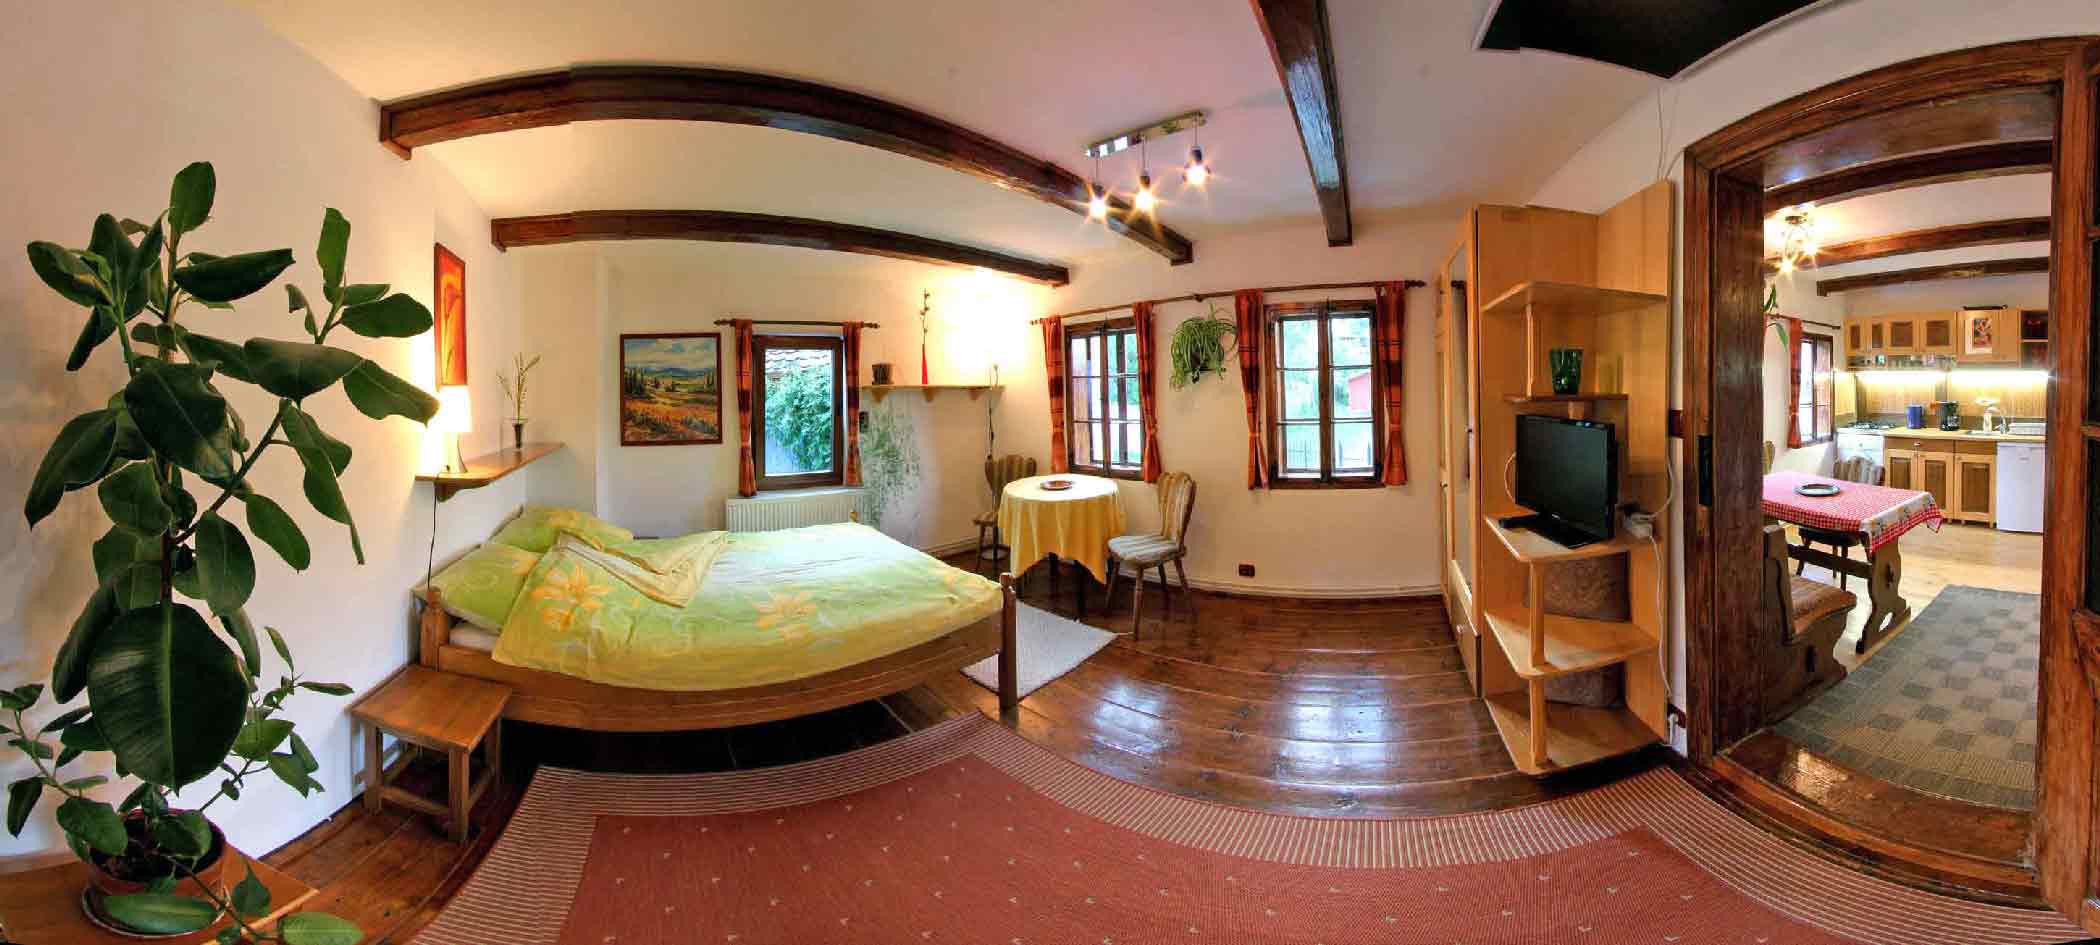 romanian cottage | self catering transylvania country holiday cottages carpathians